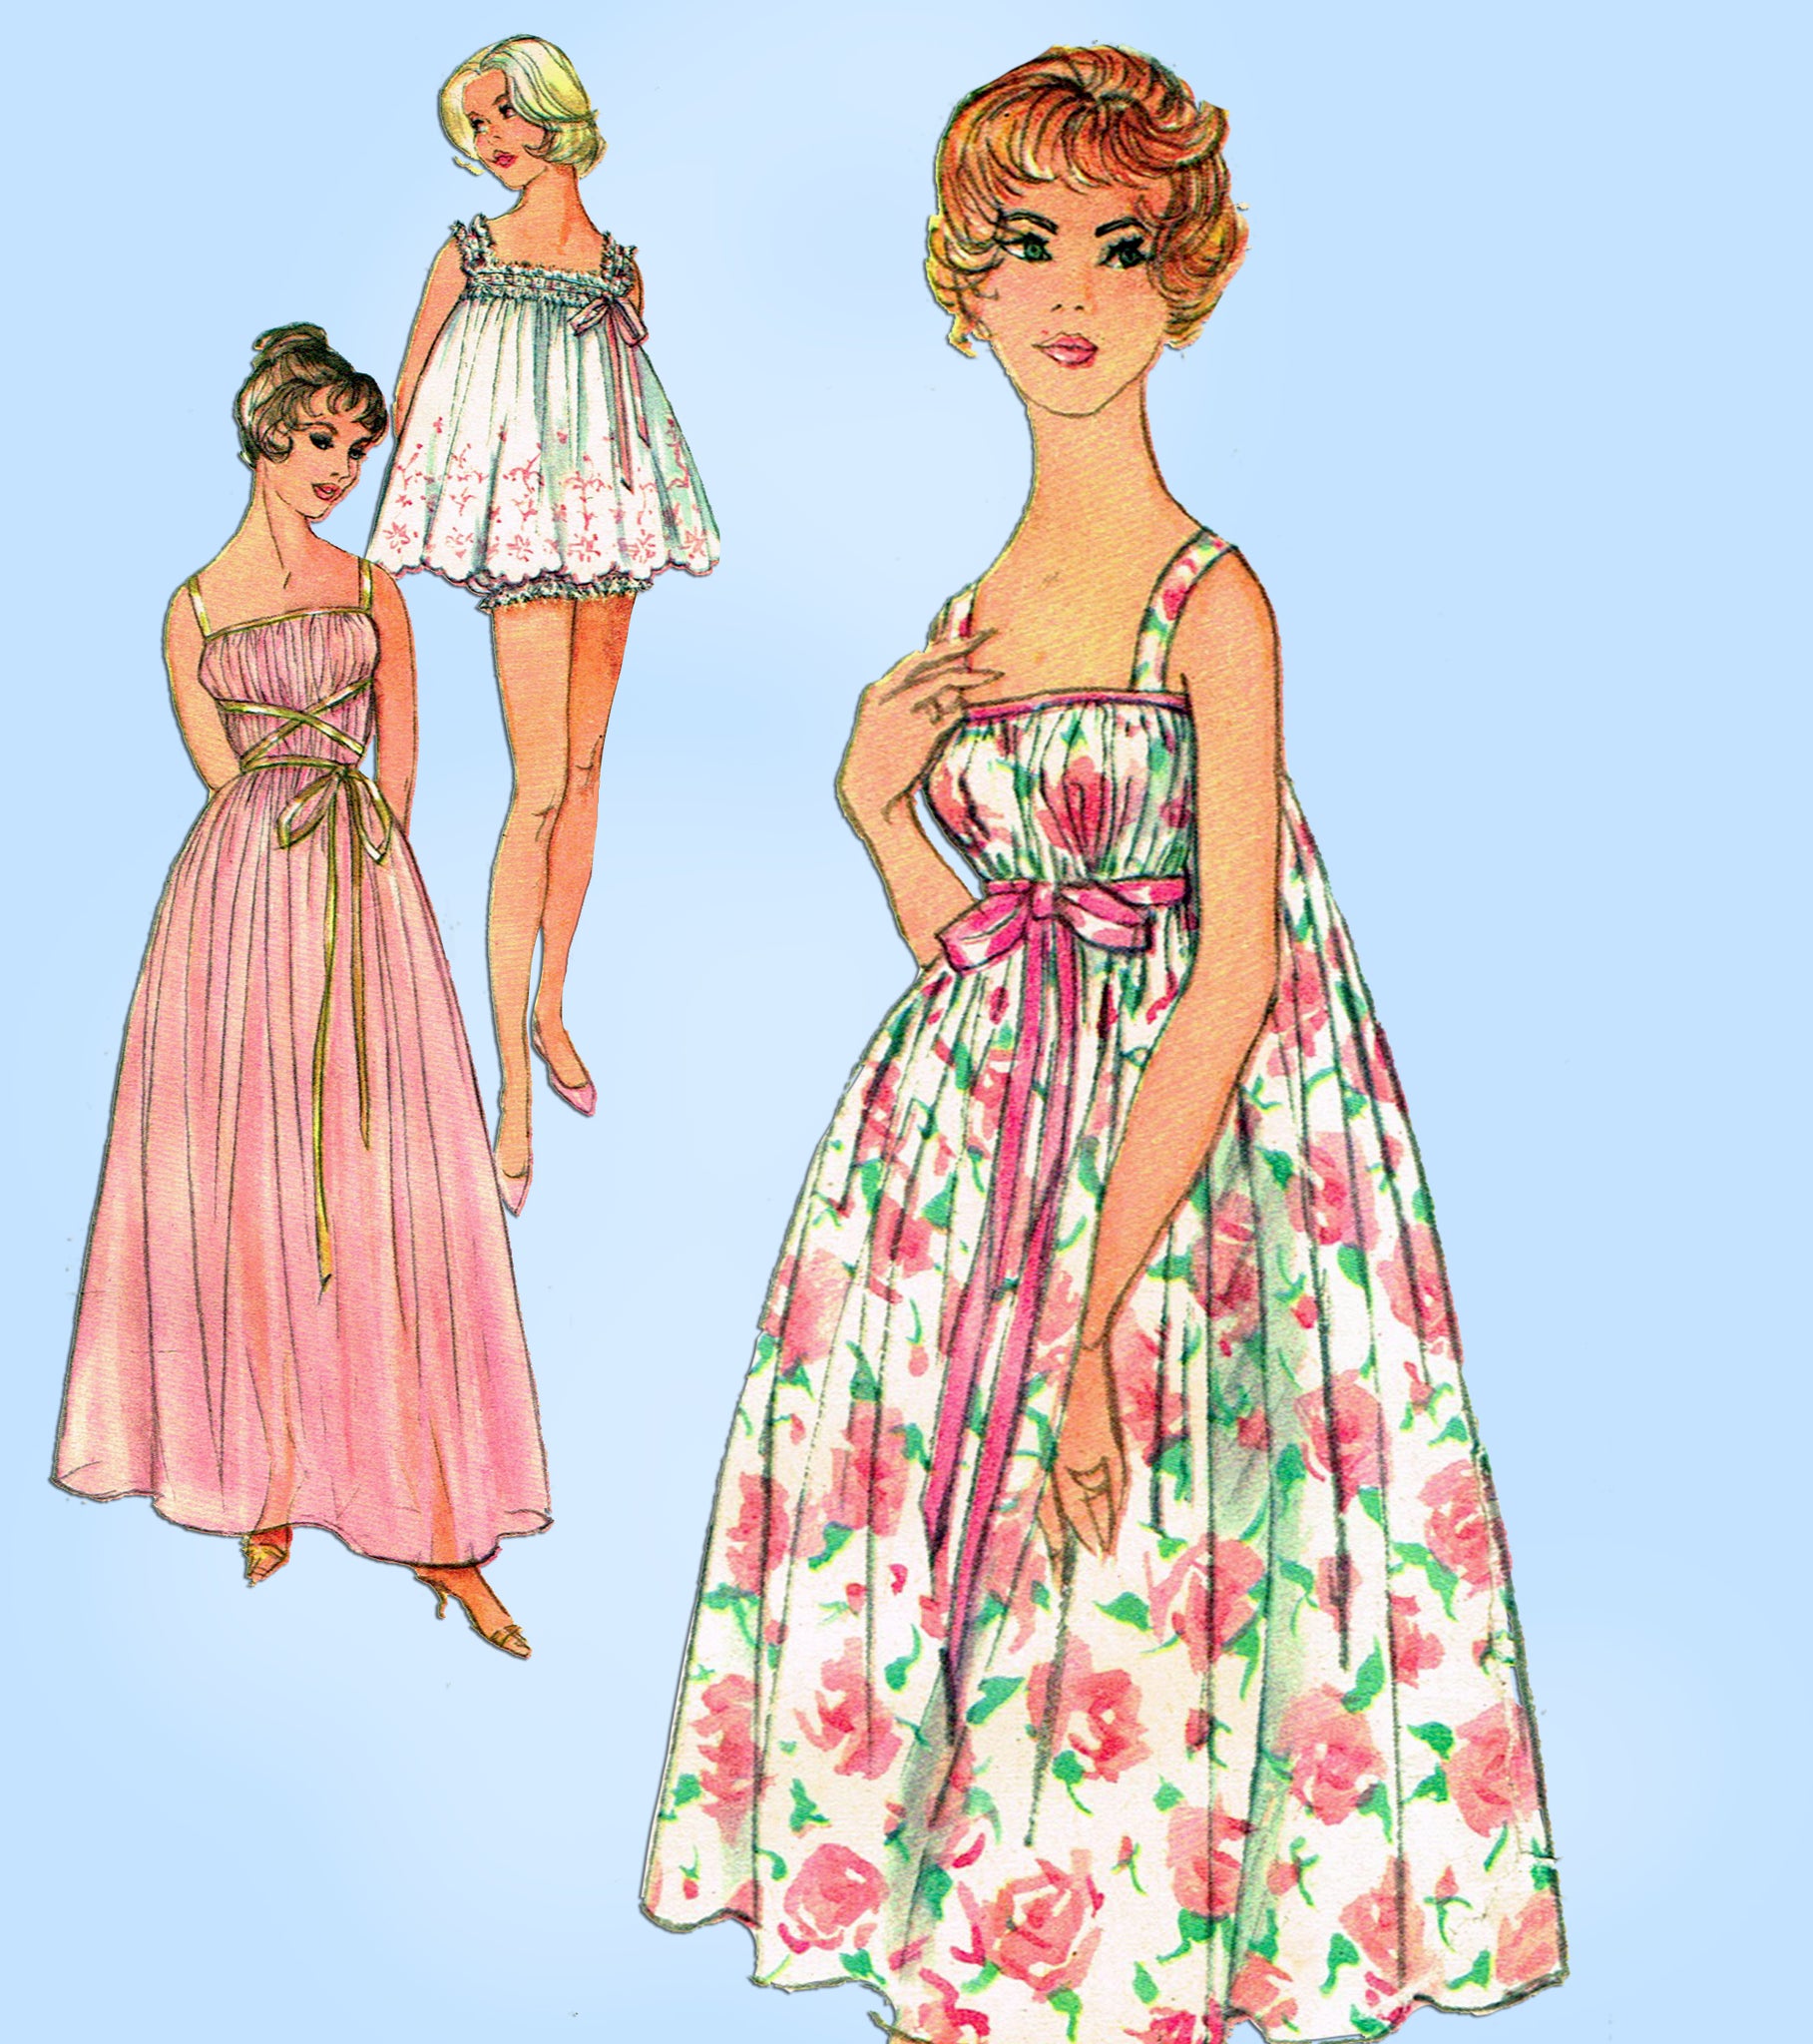 Simplicity 2093 A, Vintage Sewing Patterns